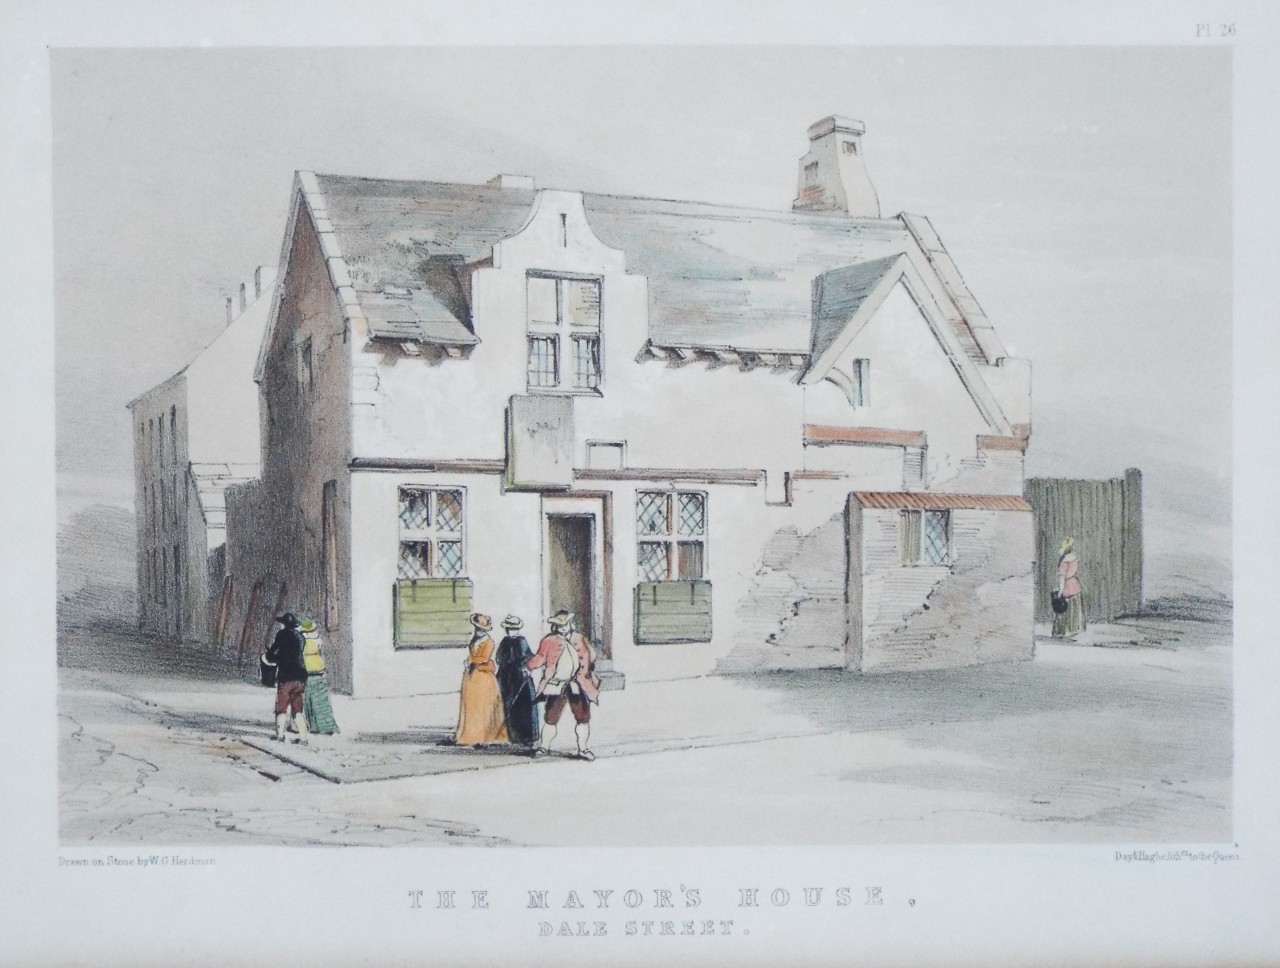 Lithograph - The Mayor's House, Dale Street. - Herdman